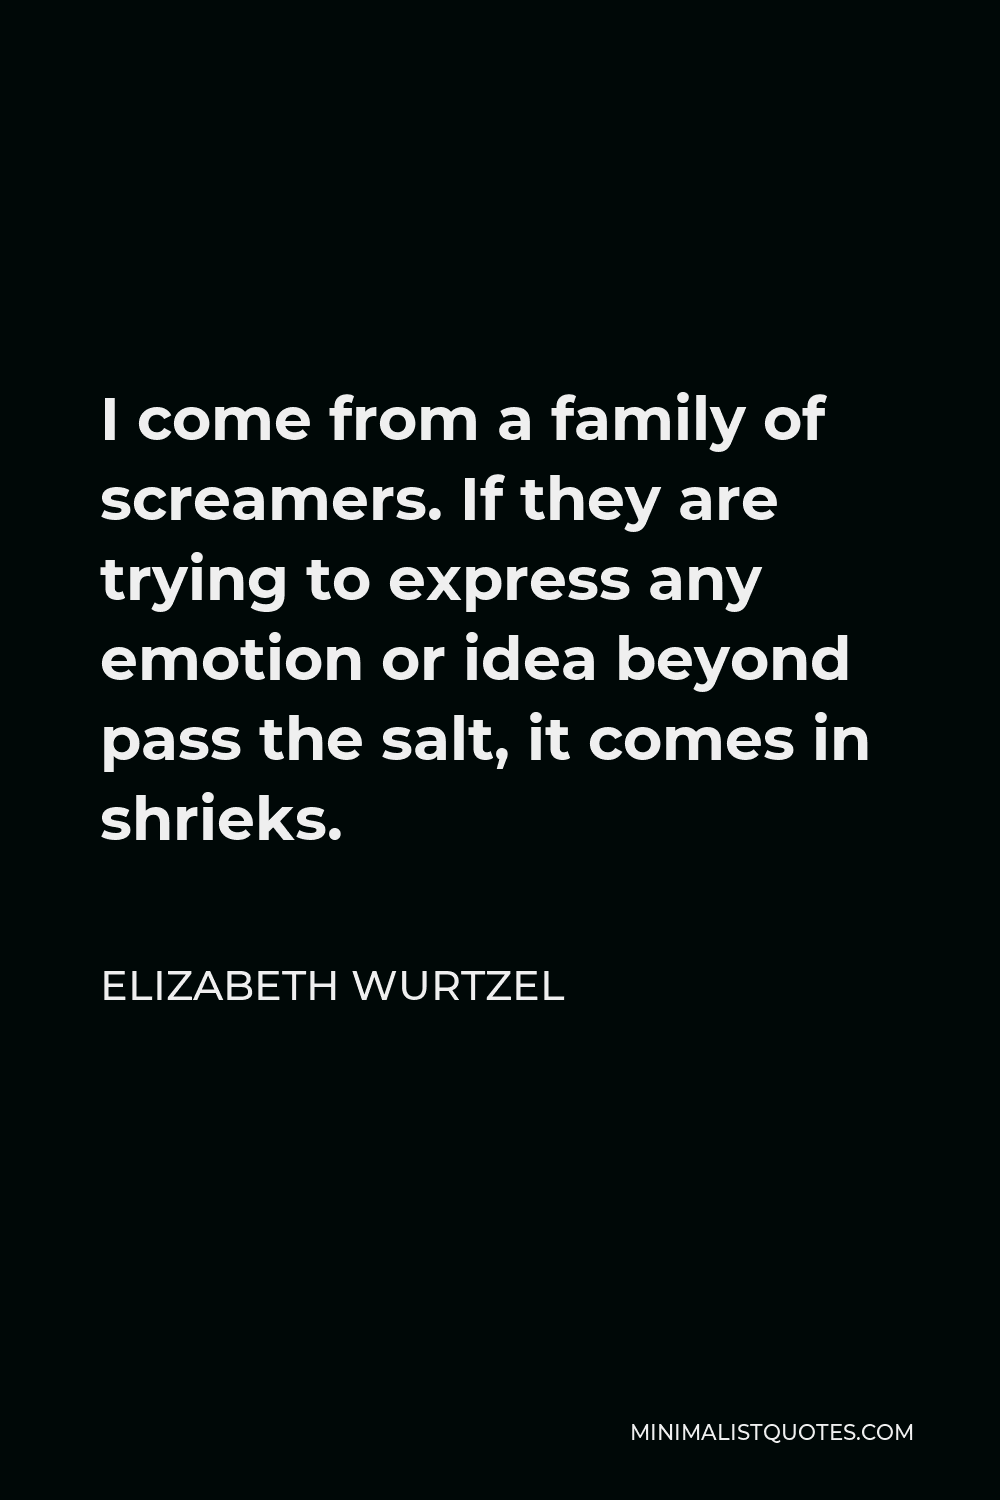 Elizabeth Wurtzel Quote - I come from a family of screamers. If they are trying to express any emotion or idea beyond pass the salt, it comes in shrieks.